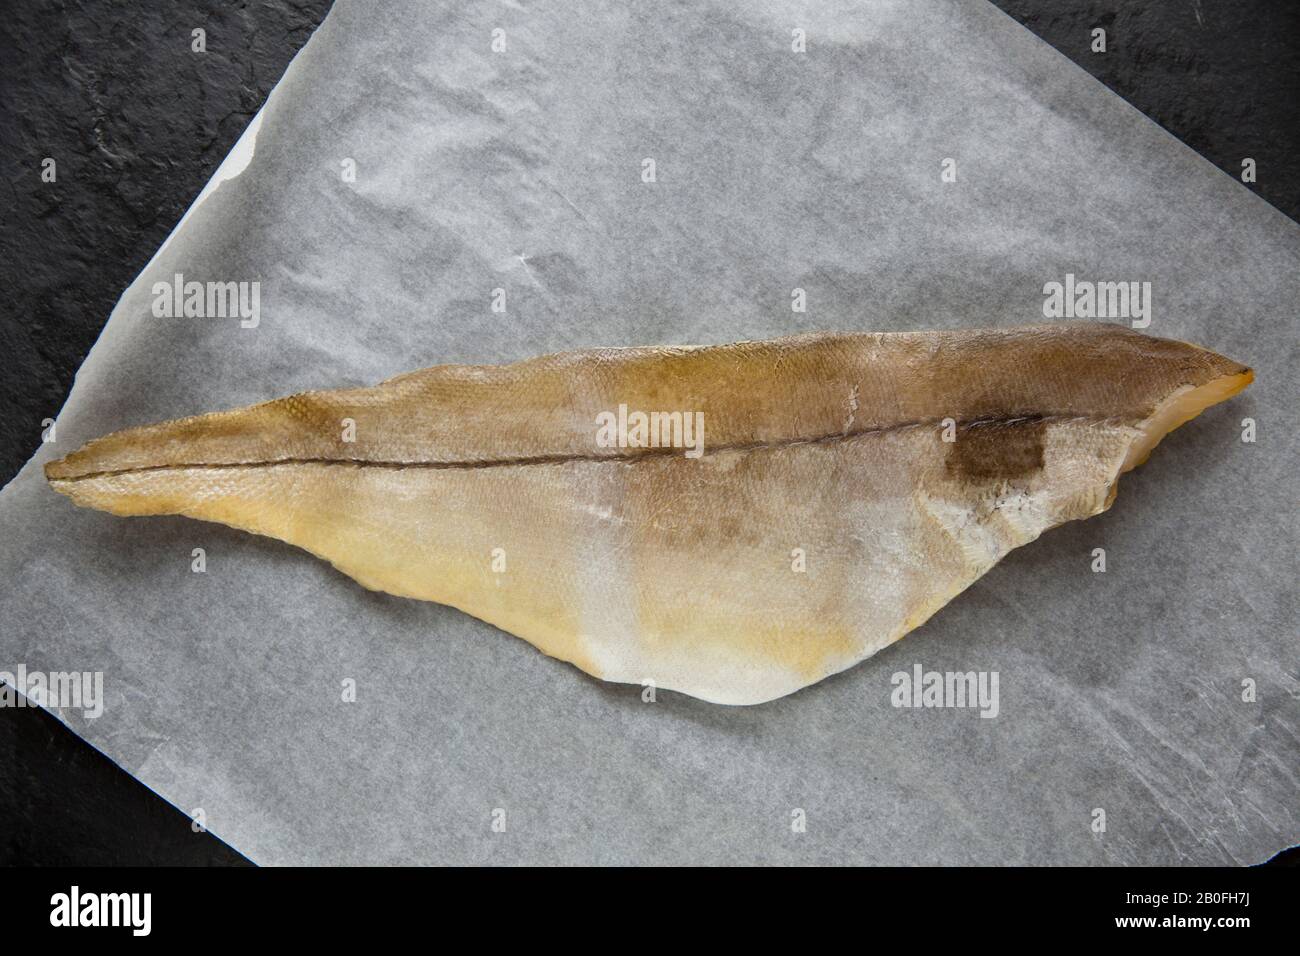 A smoked, undyed haddock fillet, Melanogrammus aeglefinus, bought from a supermarket fish counter in the UK and displayed on baking paper. It is photo Stock Photo